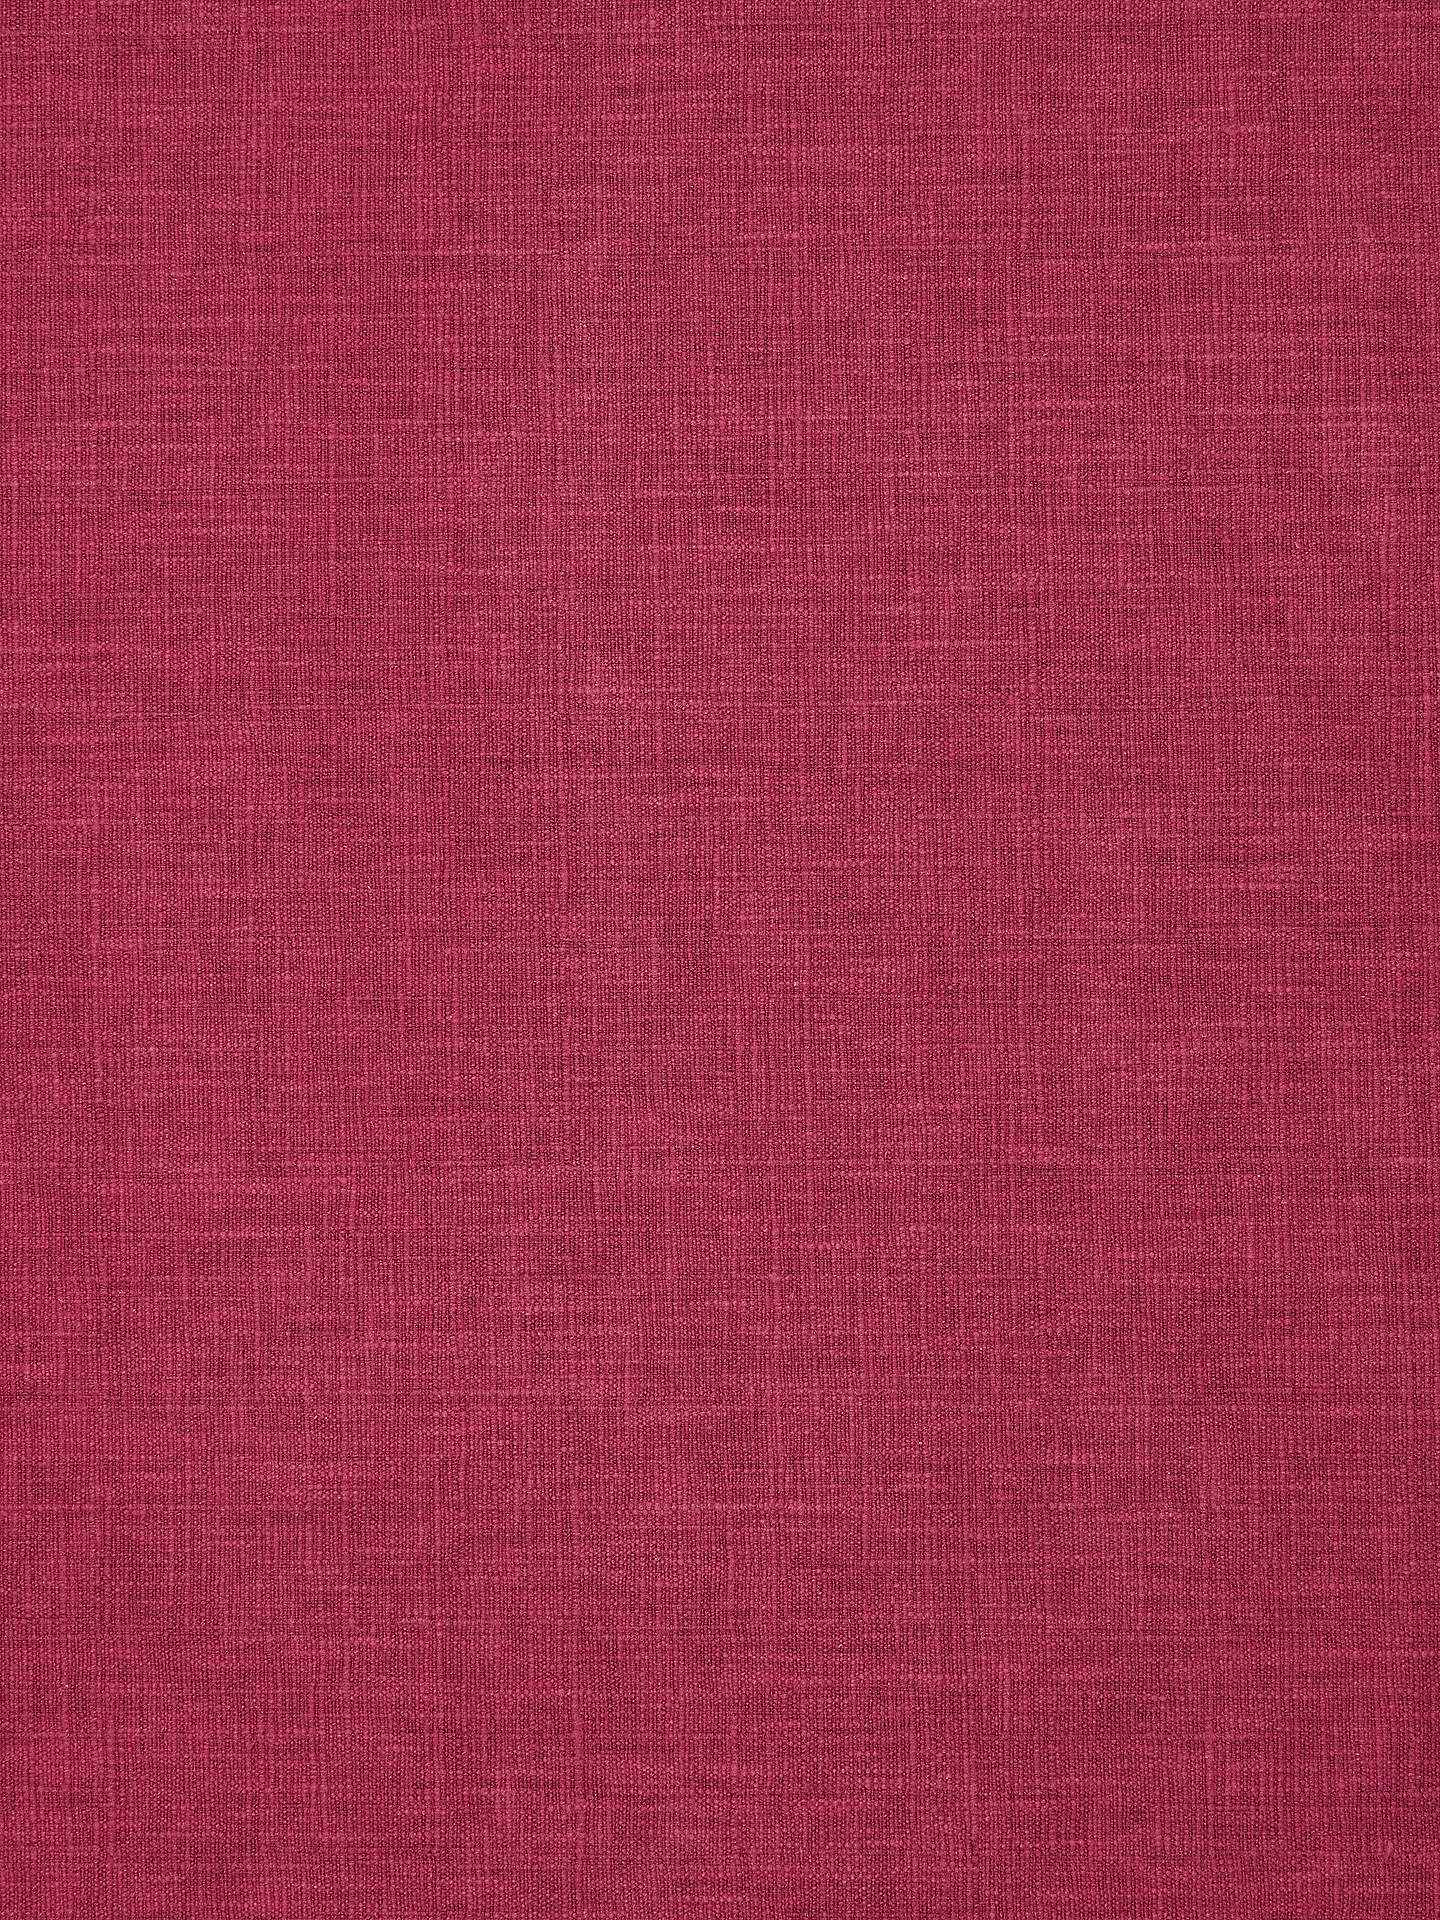 John Lewis Cotton Blend Made to Measure Curtains, Raspberry